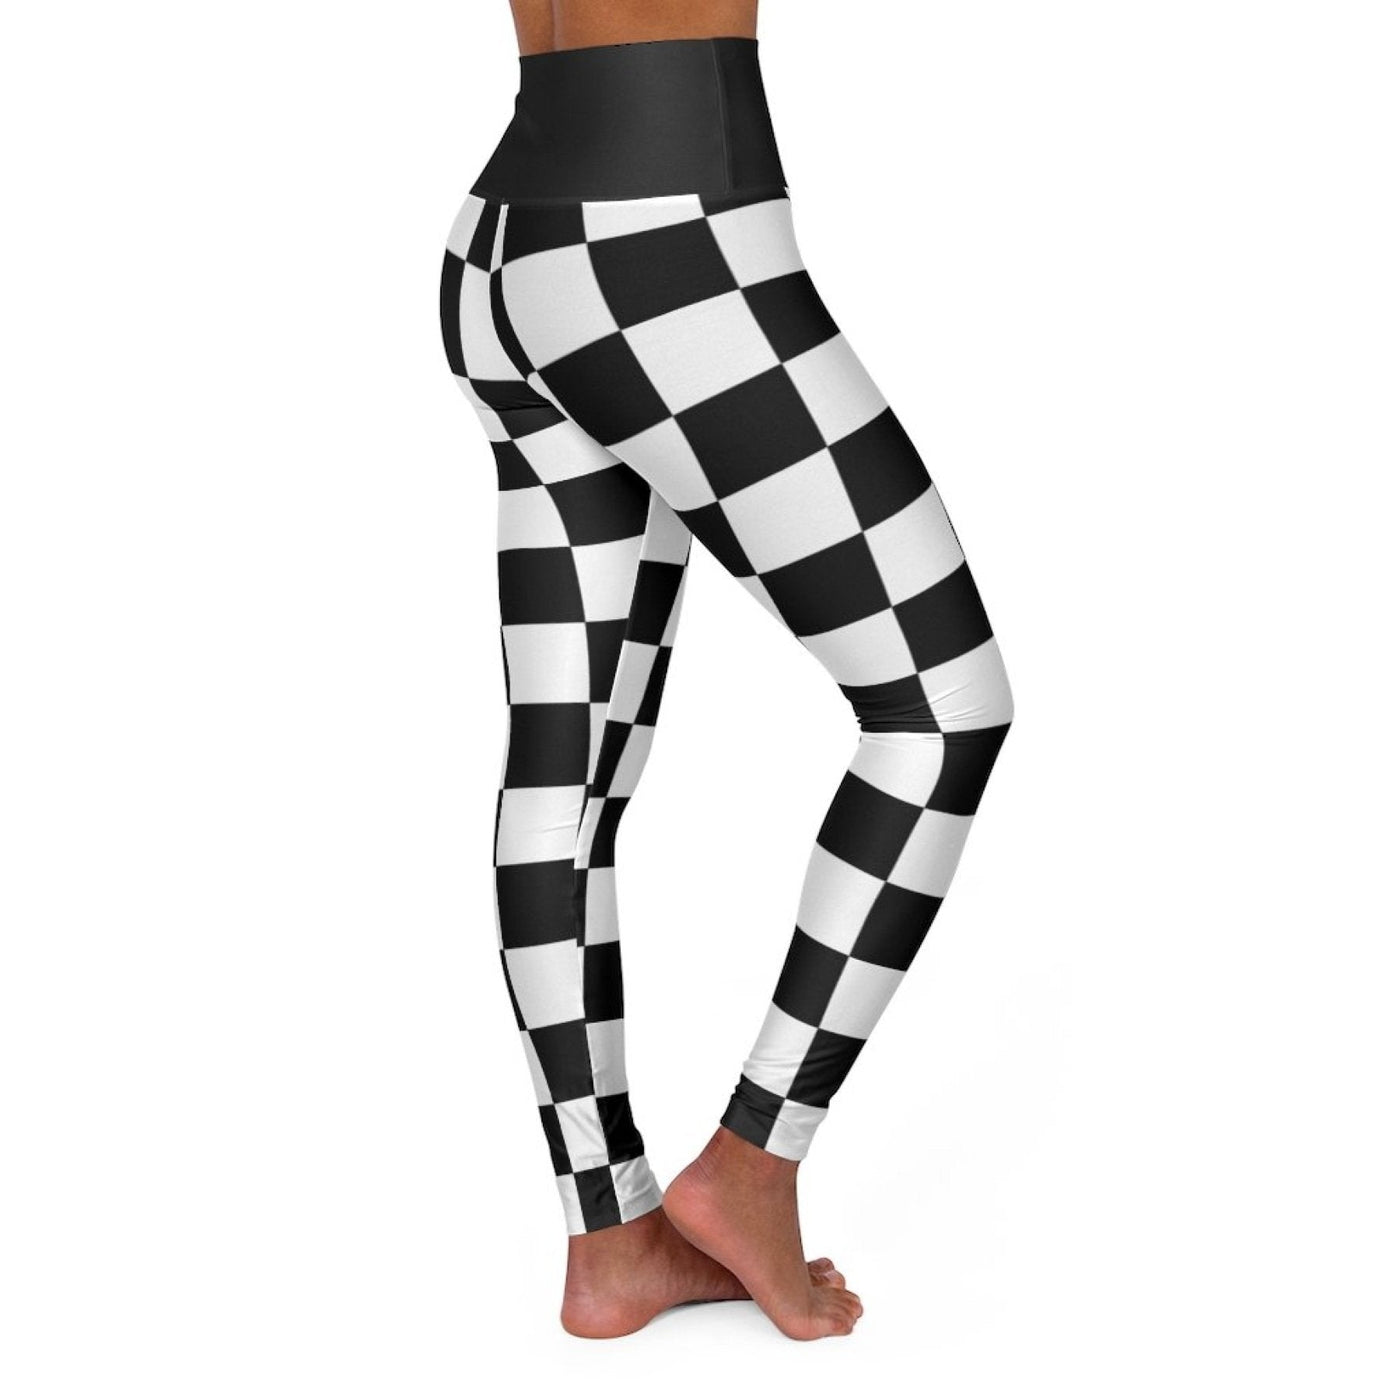 High Waisted Yoga Leggings Black And White Checker Style Fitness Pants - Womens